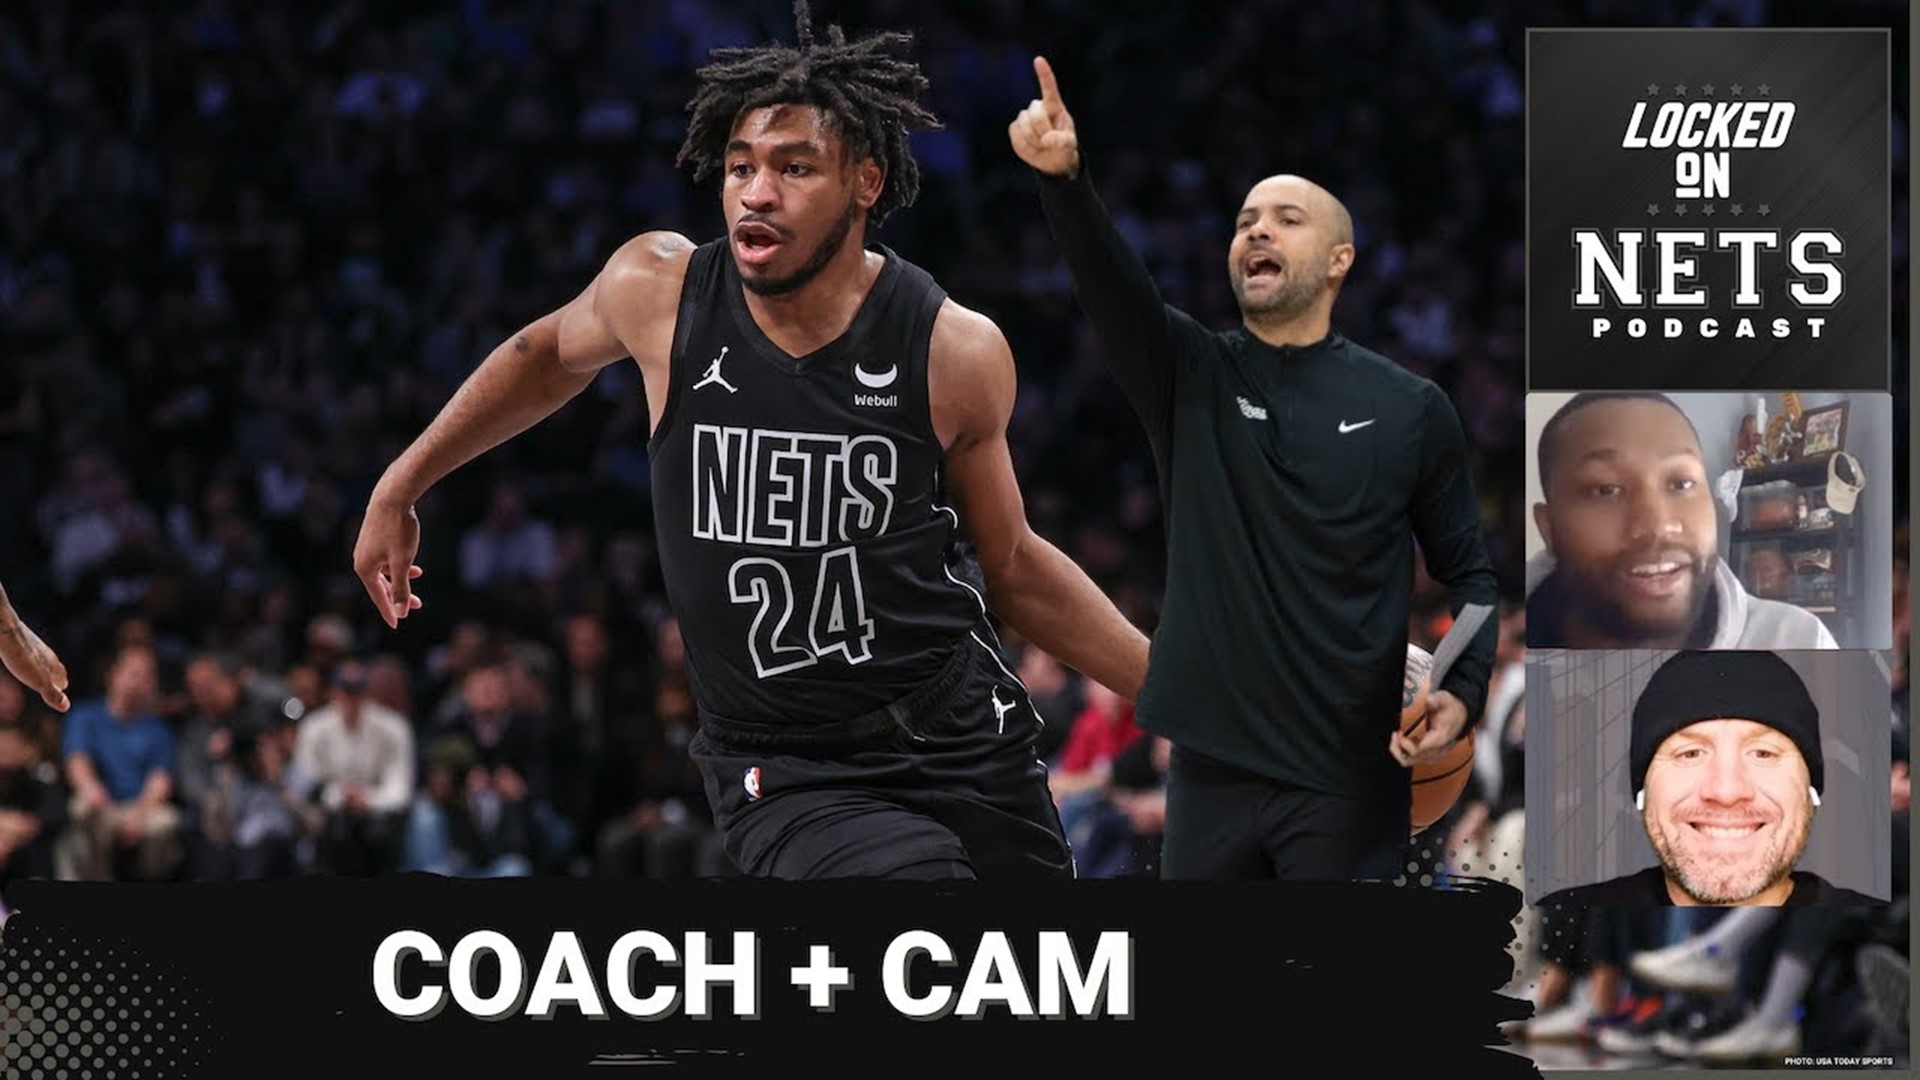 The great C.J. Holmes from NY Daily News joins the Locked on Nets podcast to discuss all things Brooklyn Nets this off-season.